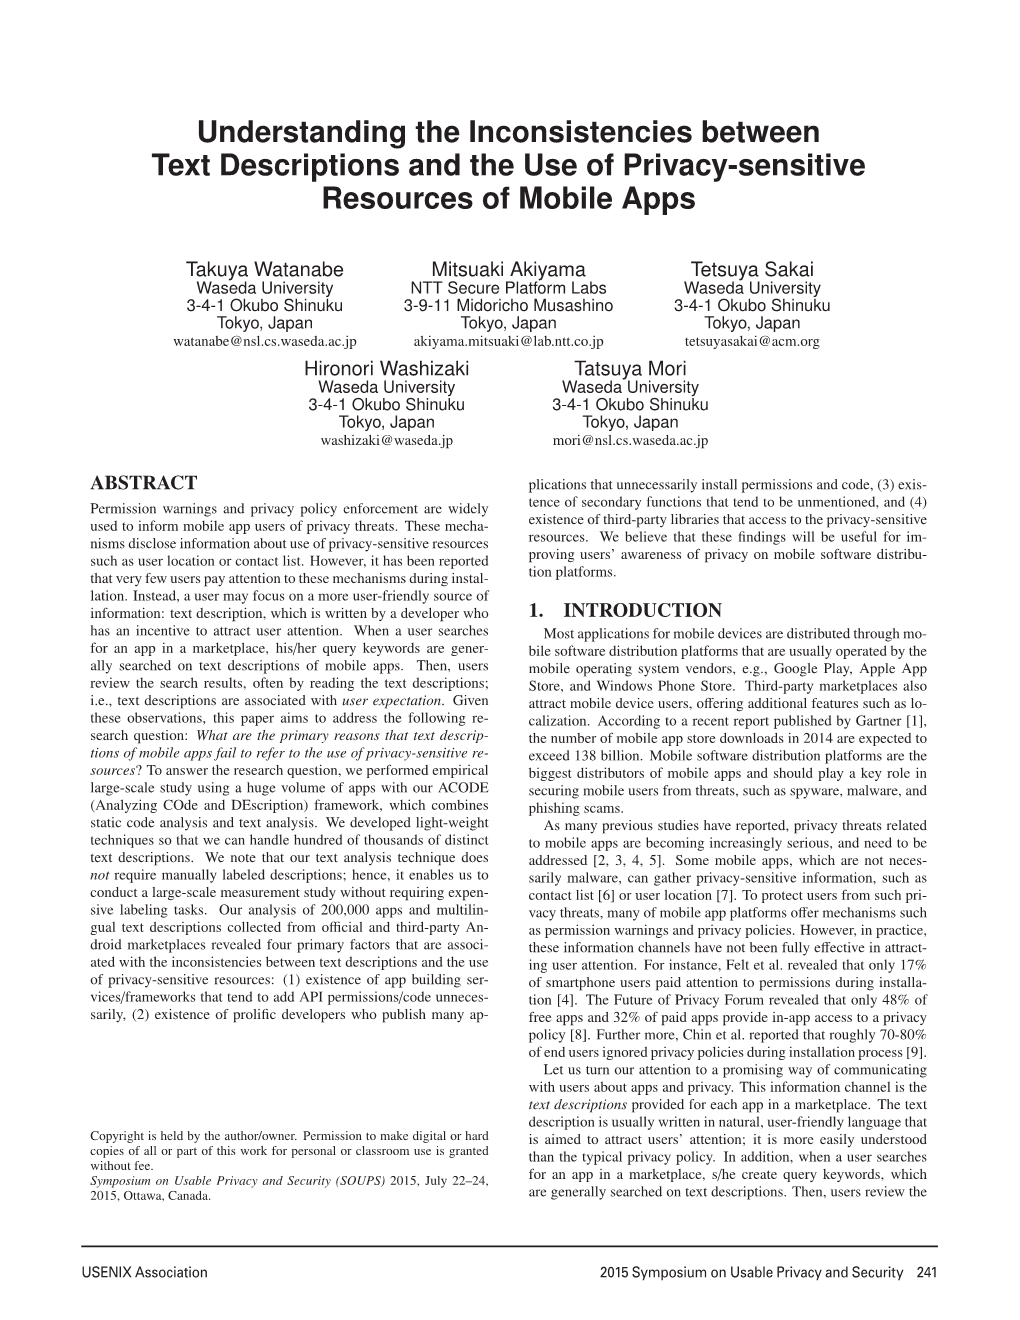 Understanding the Inconsistencies Between Text Descriptions and the Use of Privacy-Sensitive Resources of Mobile Apps